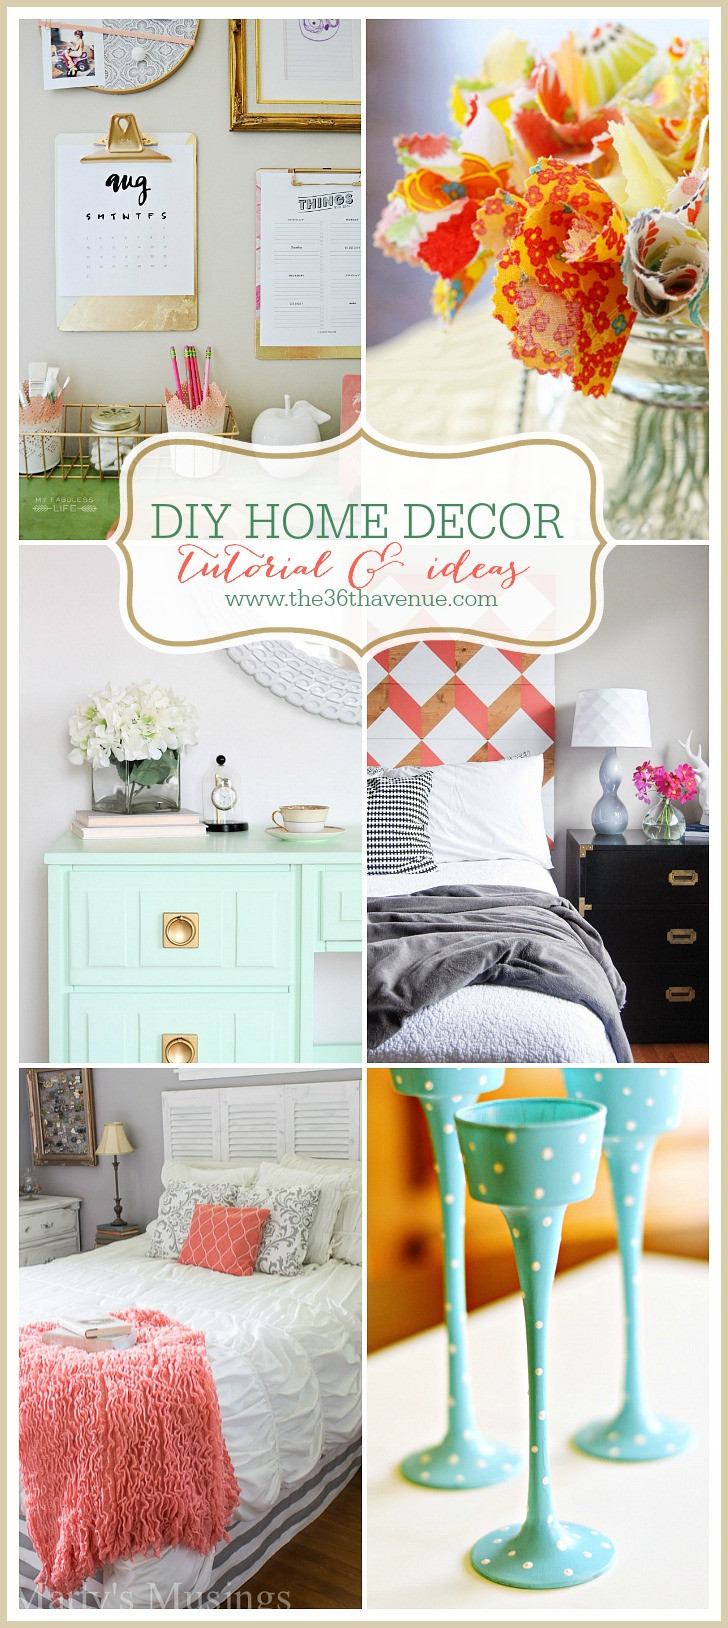 DIY Home Decore
 The 36th AVENUE Home Decor DIY Projects